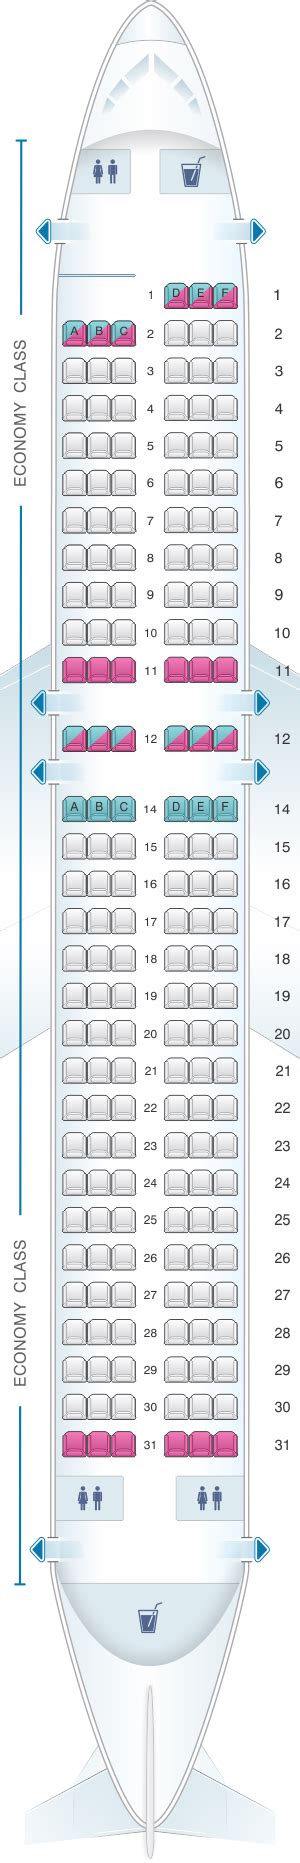 Seat Maps; Allegiant Air Airbus A320 Seat Map; Seat 5b; Allegiant Air Reviews. Seating Charts · Airbus A319 Airbus A320 · Boeing 757-200 · McDonnell Douglas MD-80 . Allegiant Air Airbus A320 Seat Reviews Show seat chart [1] Pro tips: this seat has extra legroom : no under-seat stowage during takeoff and landing :